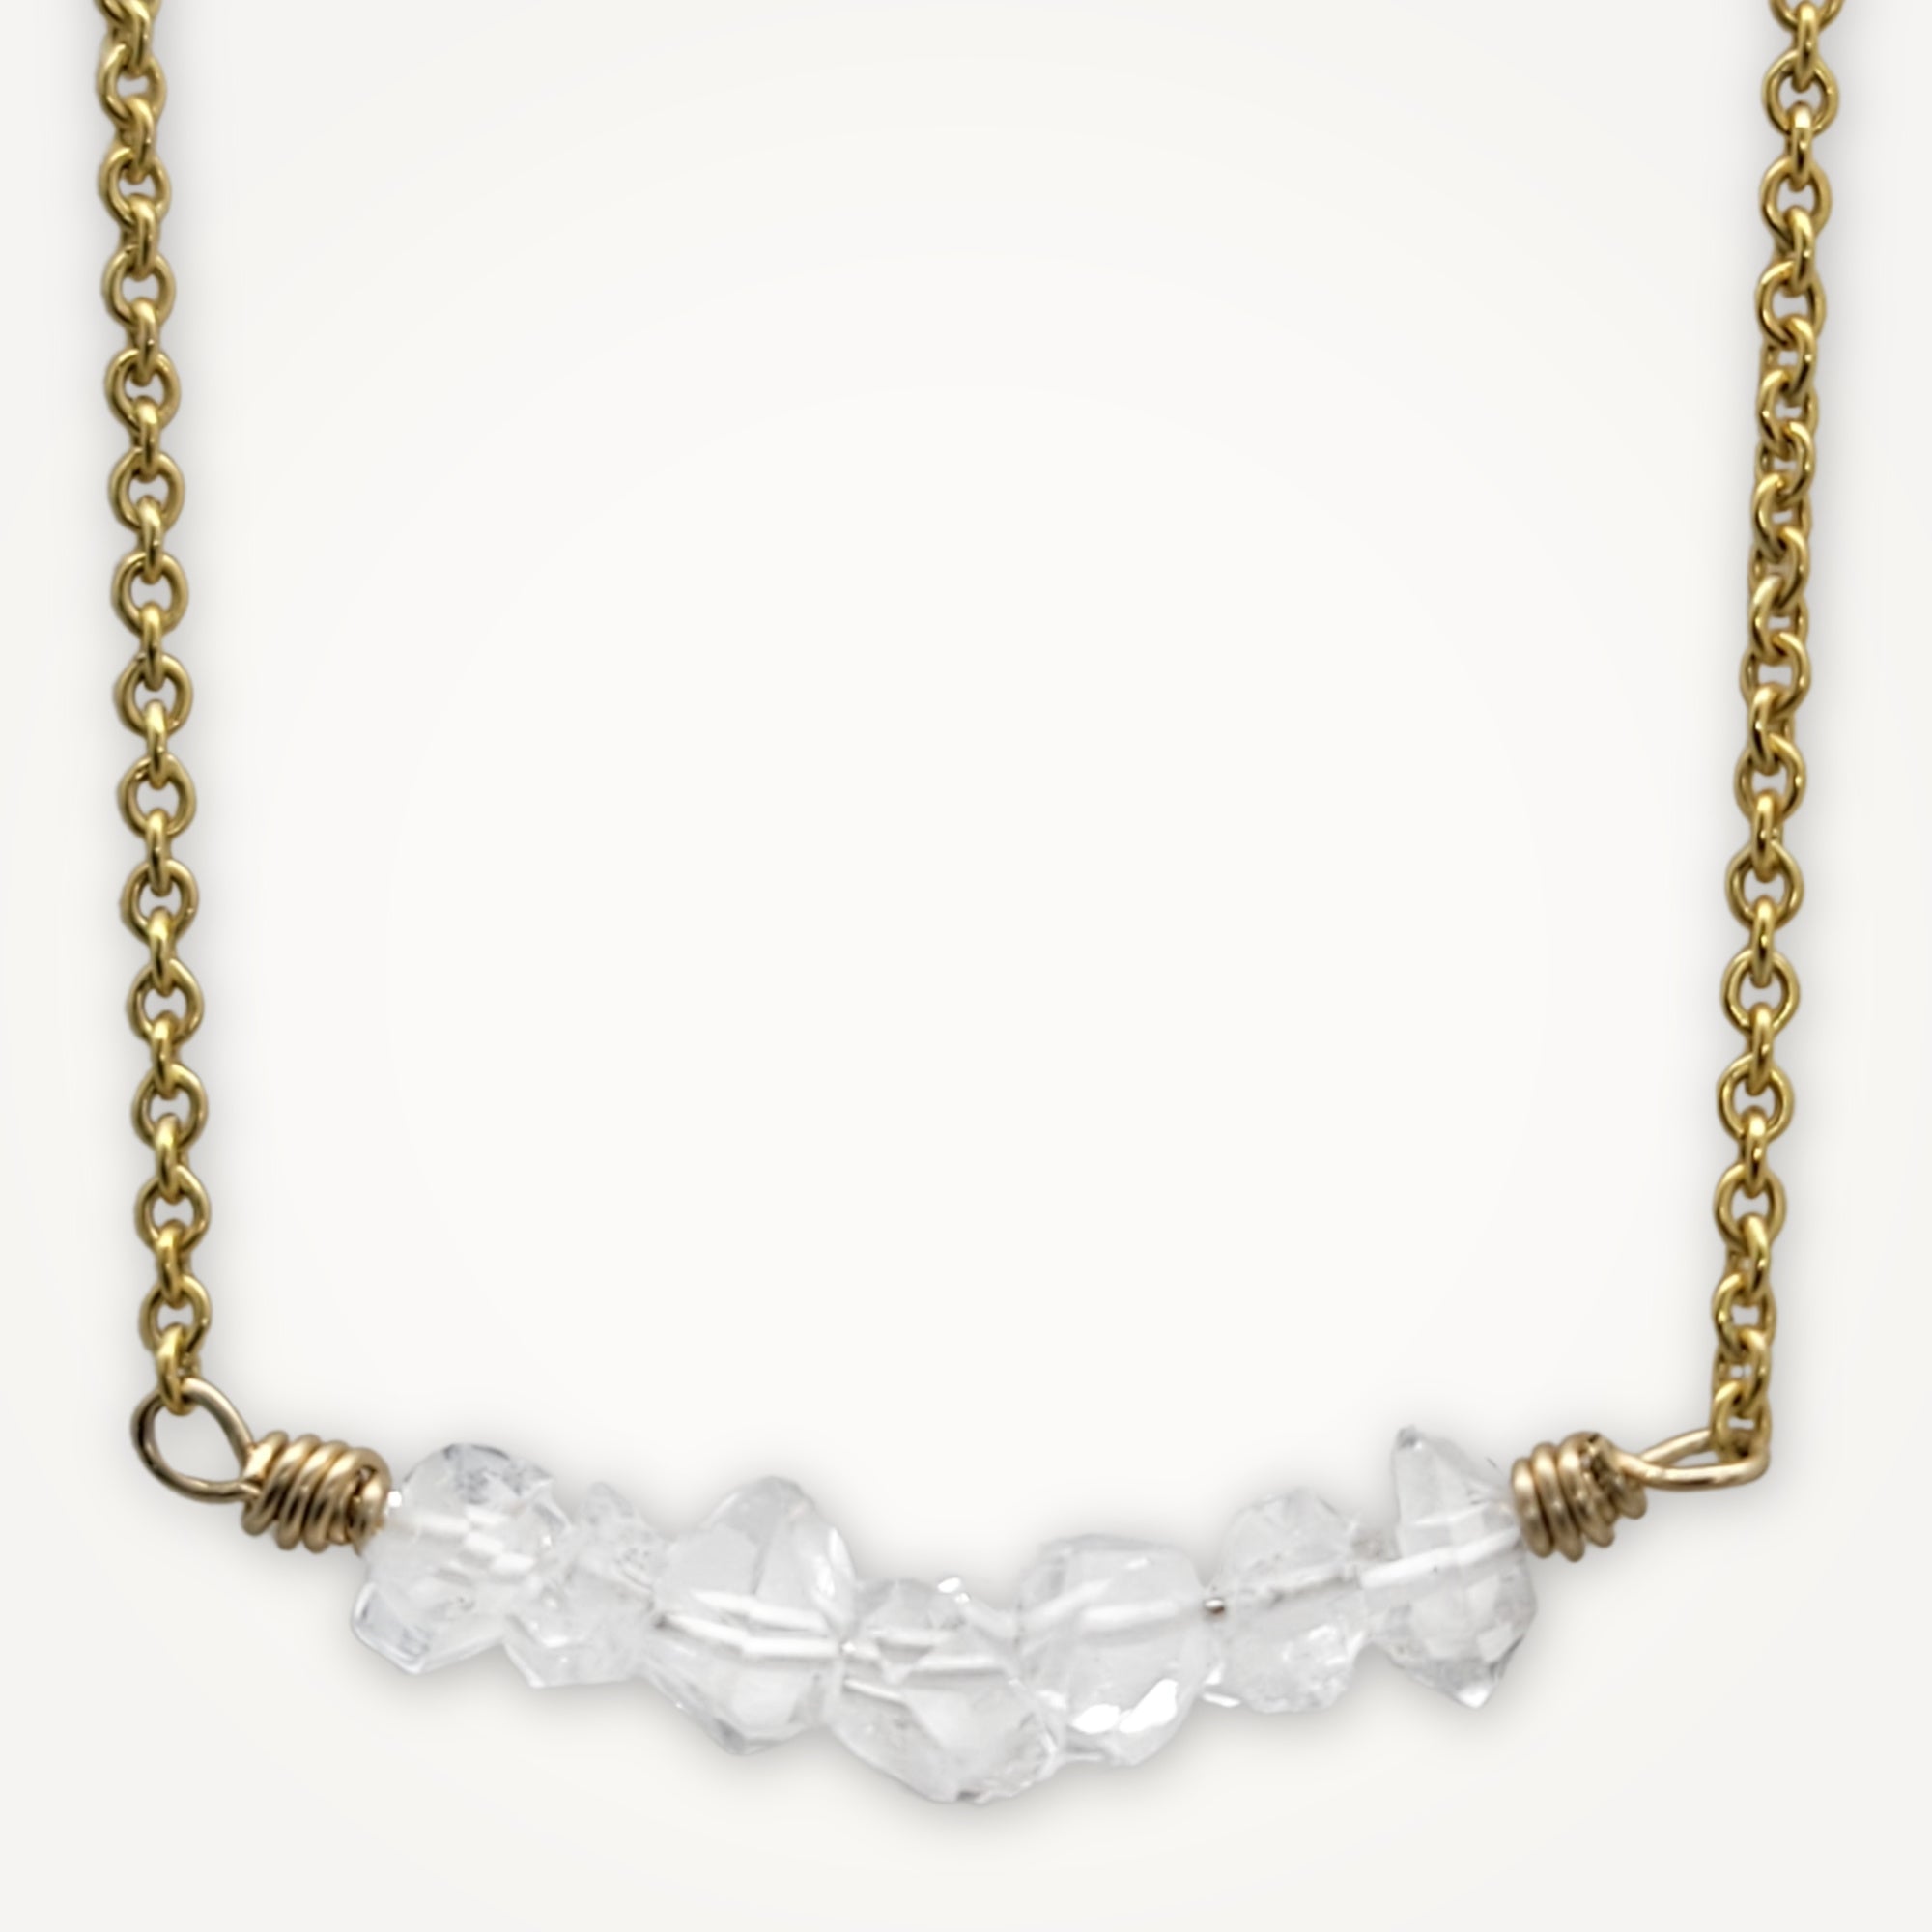 Gold + Delicate • Herkimer Diamond Necklace